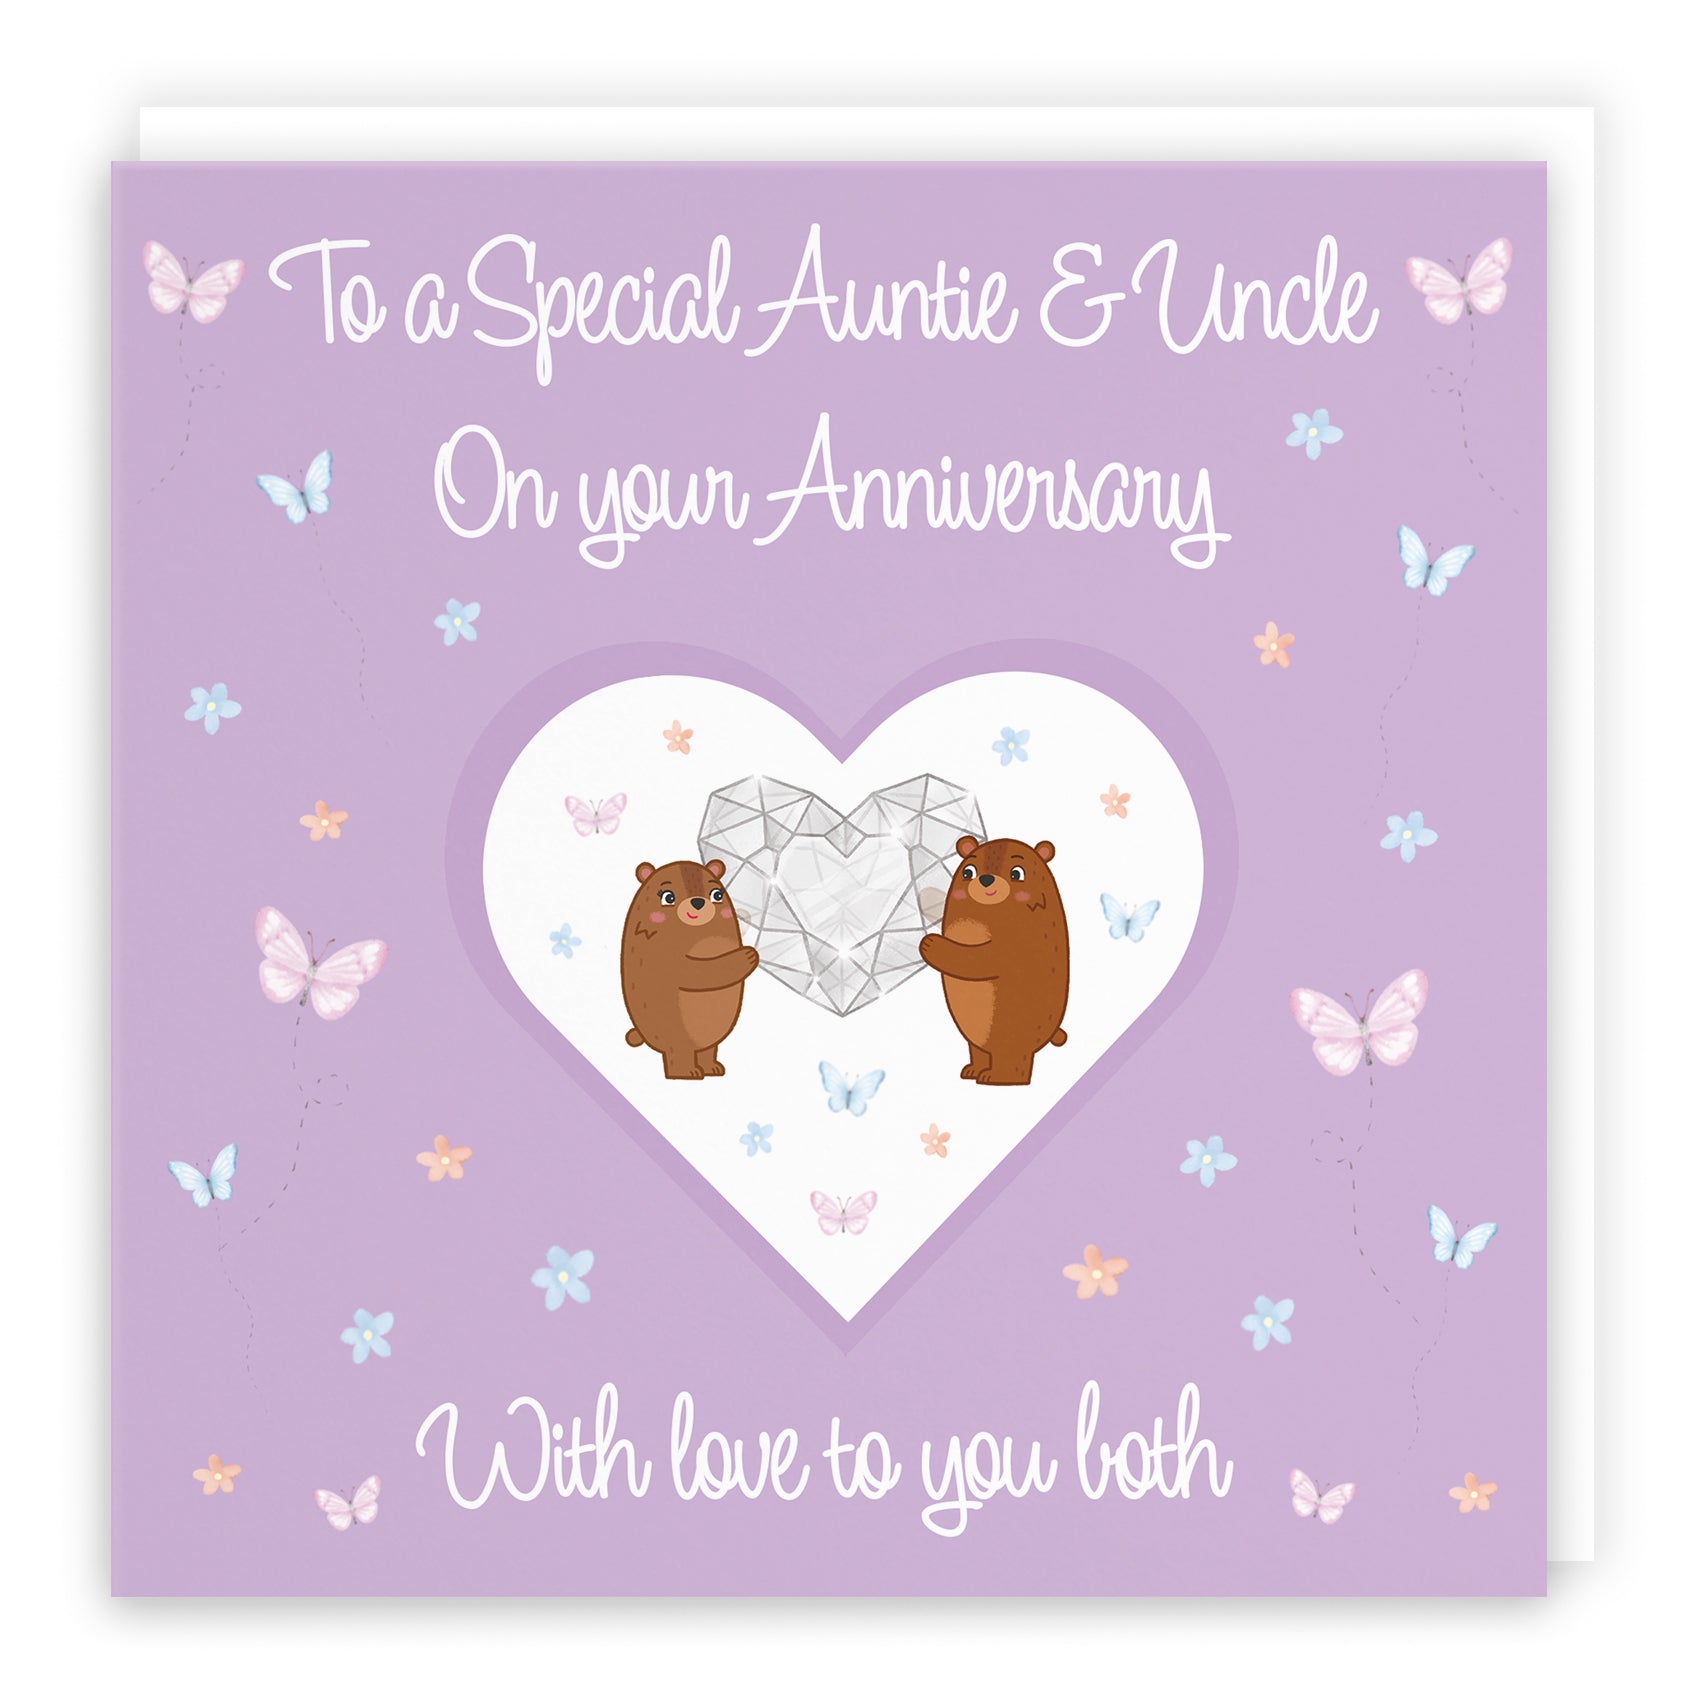 Auntie And Uncle Anniversary Card Romantic Meadows